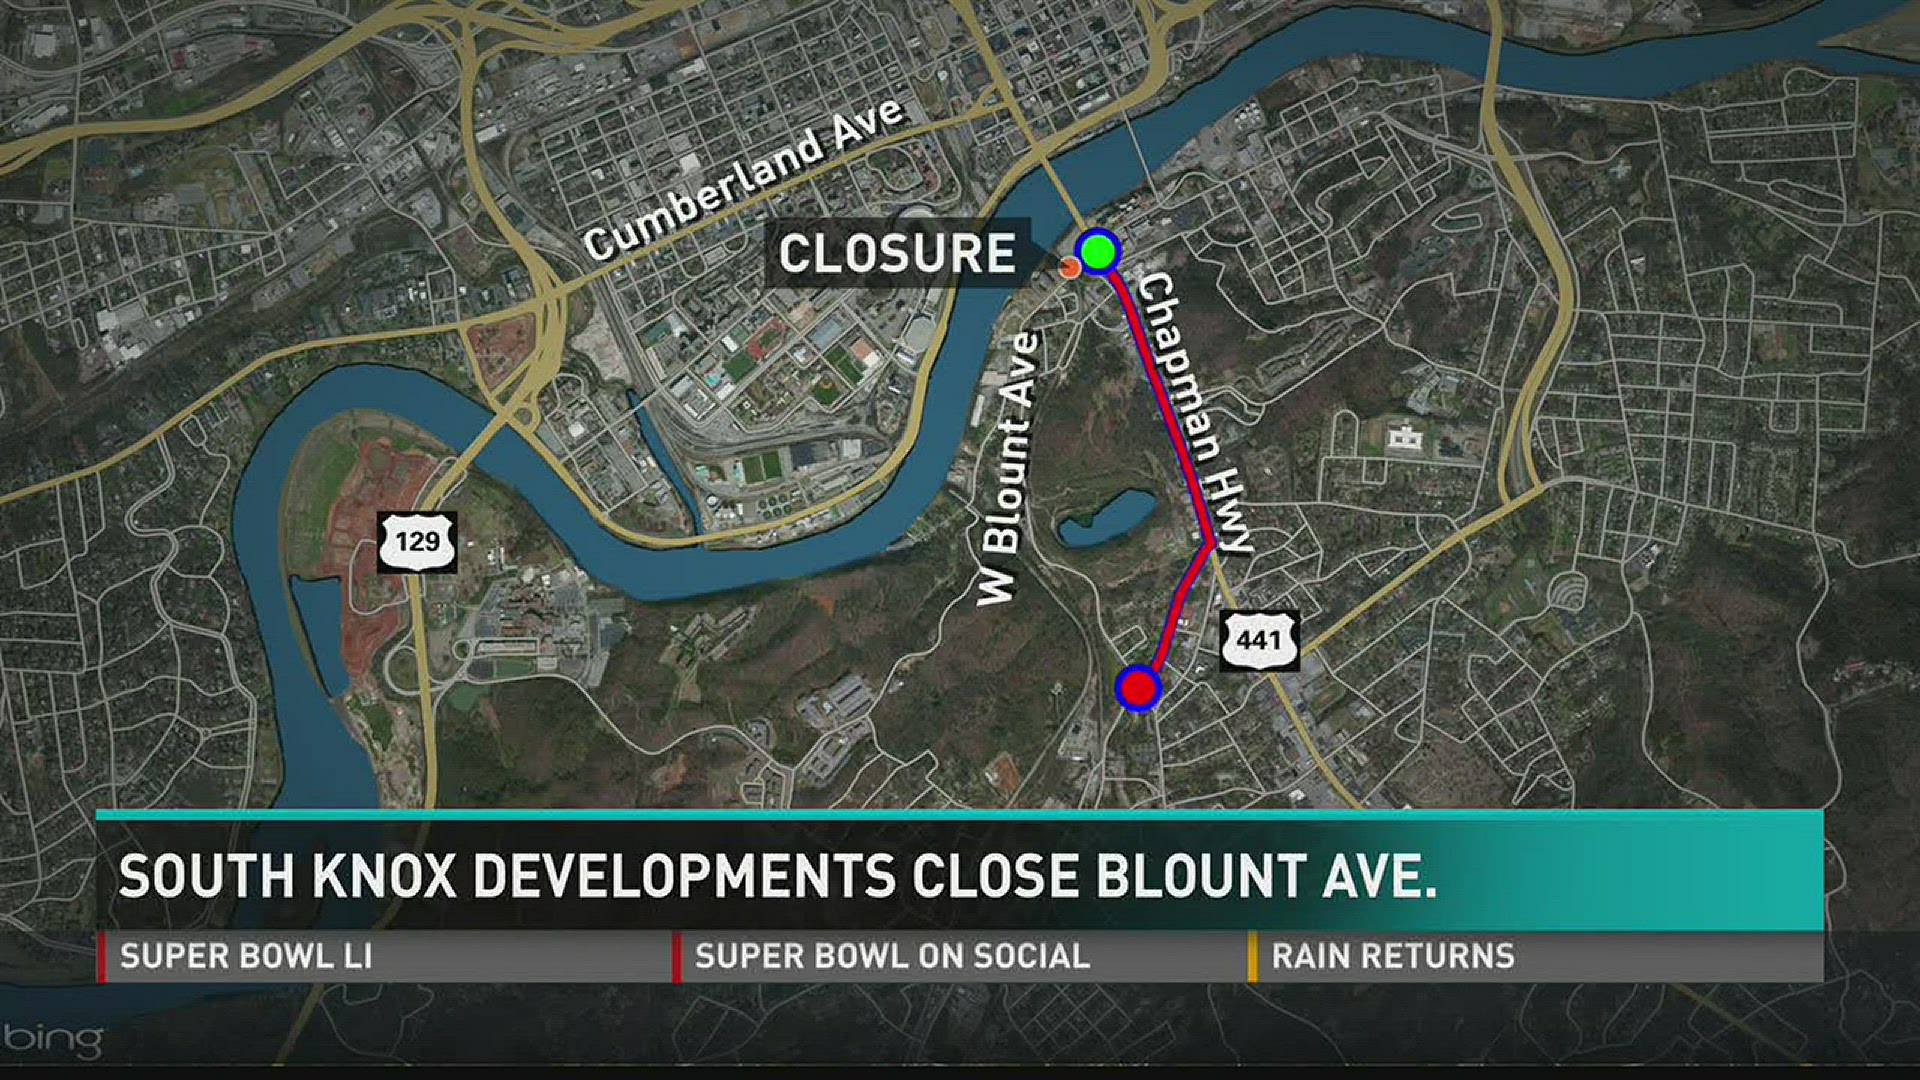 South Knox developments close Blount Avenue for the next 90 days.